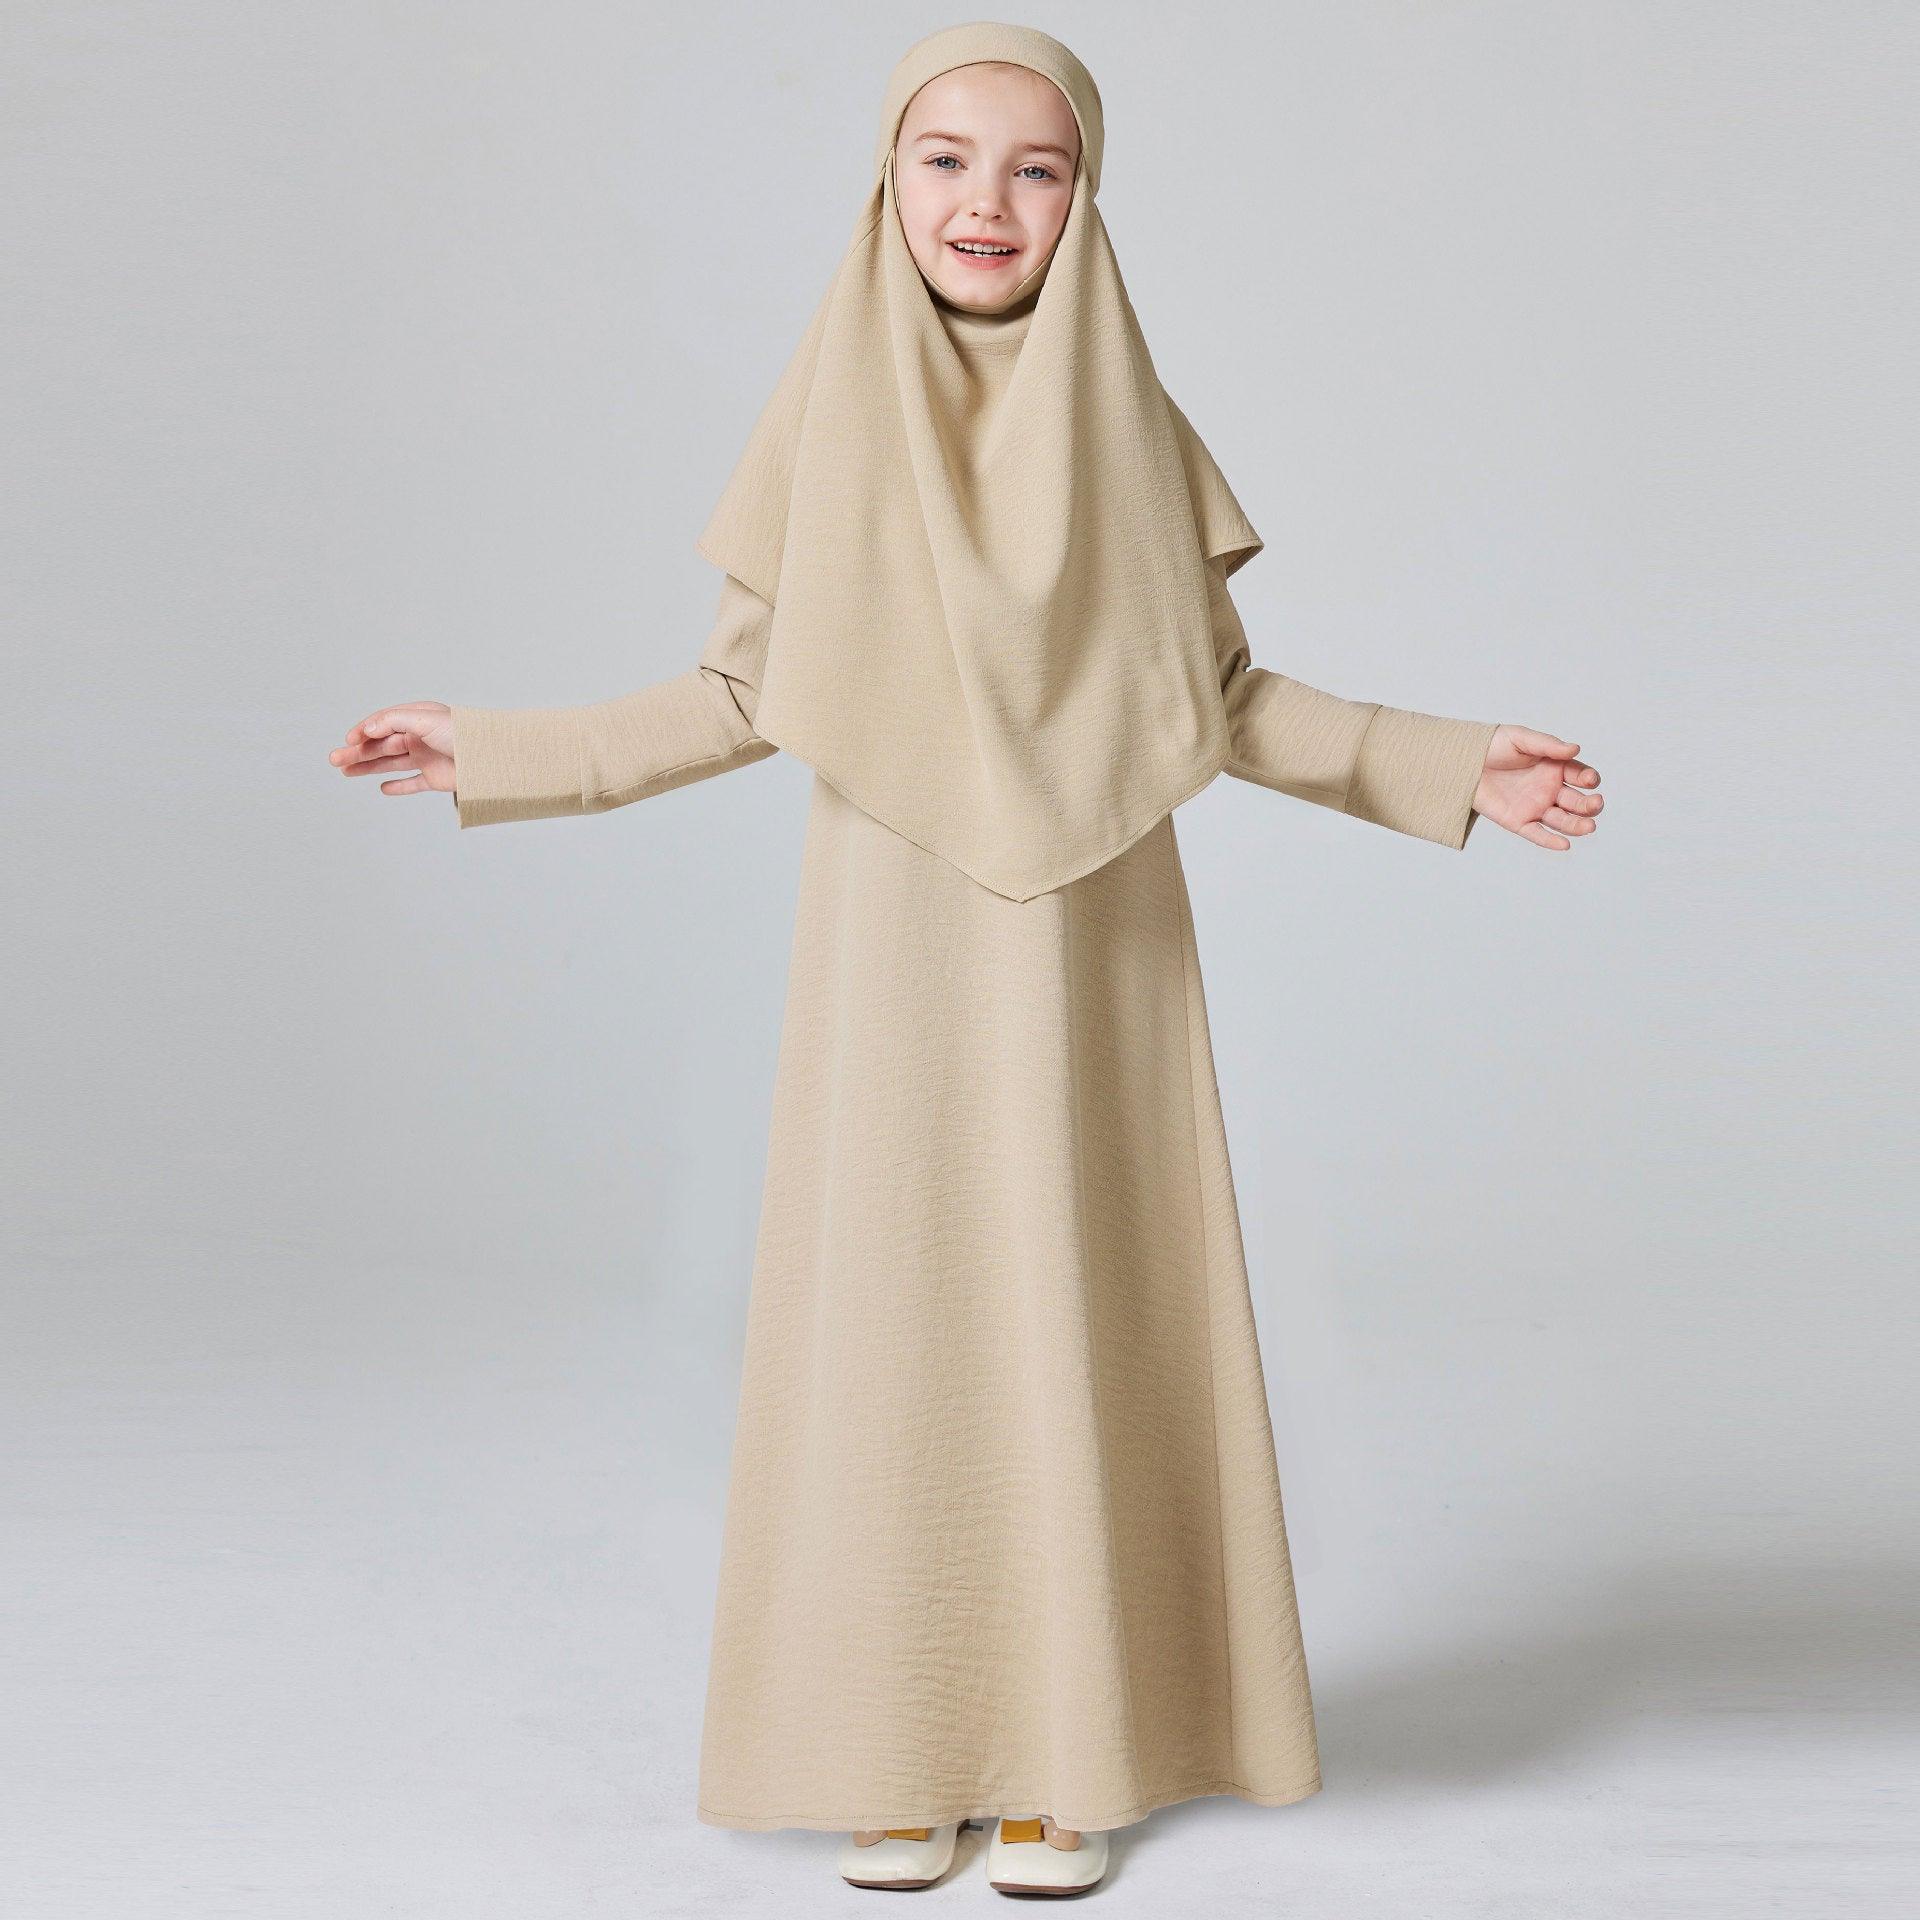 MKG003 Girls Pleated Solid Color Abaya 2 - Piece Set - Mariam's Collection